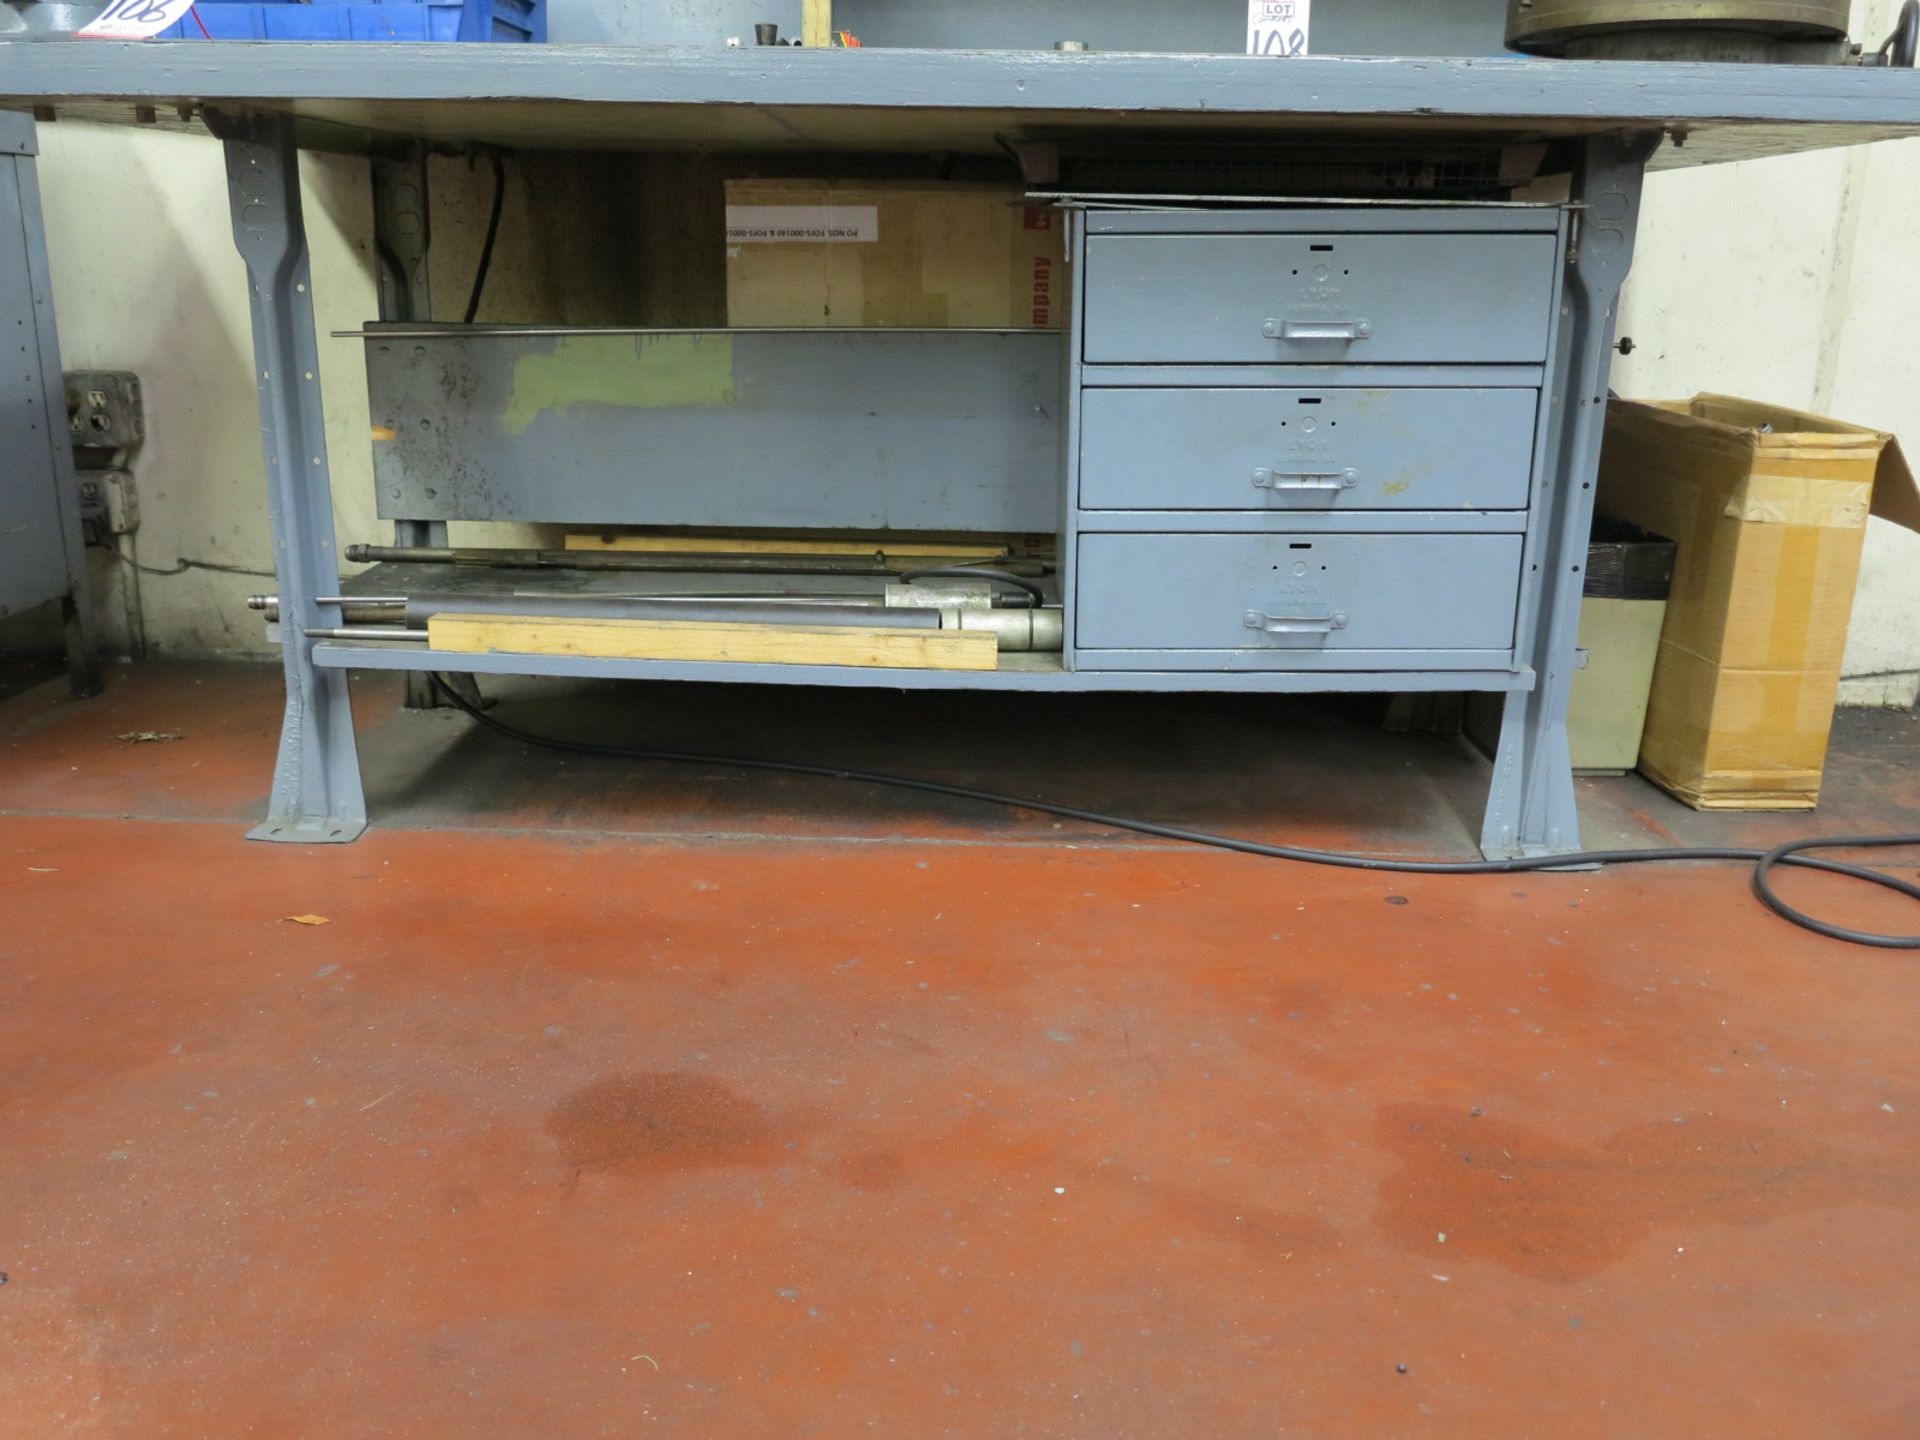 LOT - WORKBENCH, 7' X 3', W/ CONTENTS OF UPPER SHELF UNIT, TO INCLUDE: MILLING TOOLS, BUSHINGS,